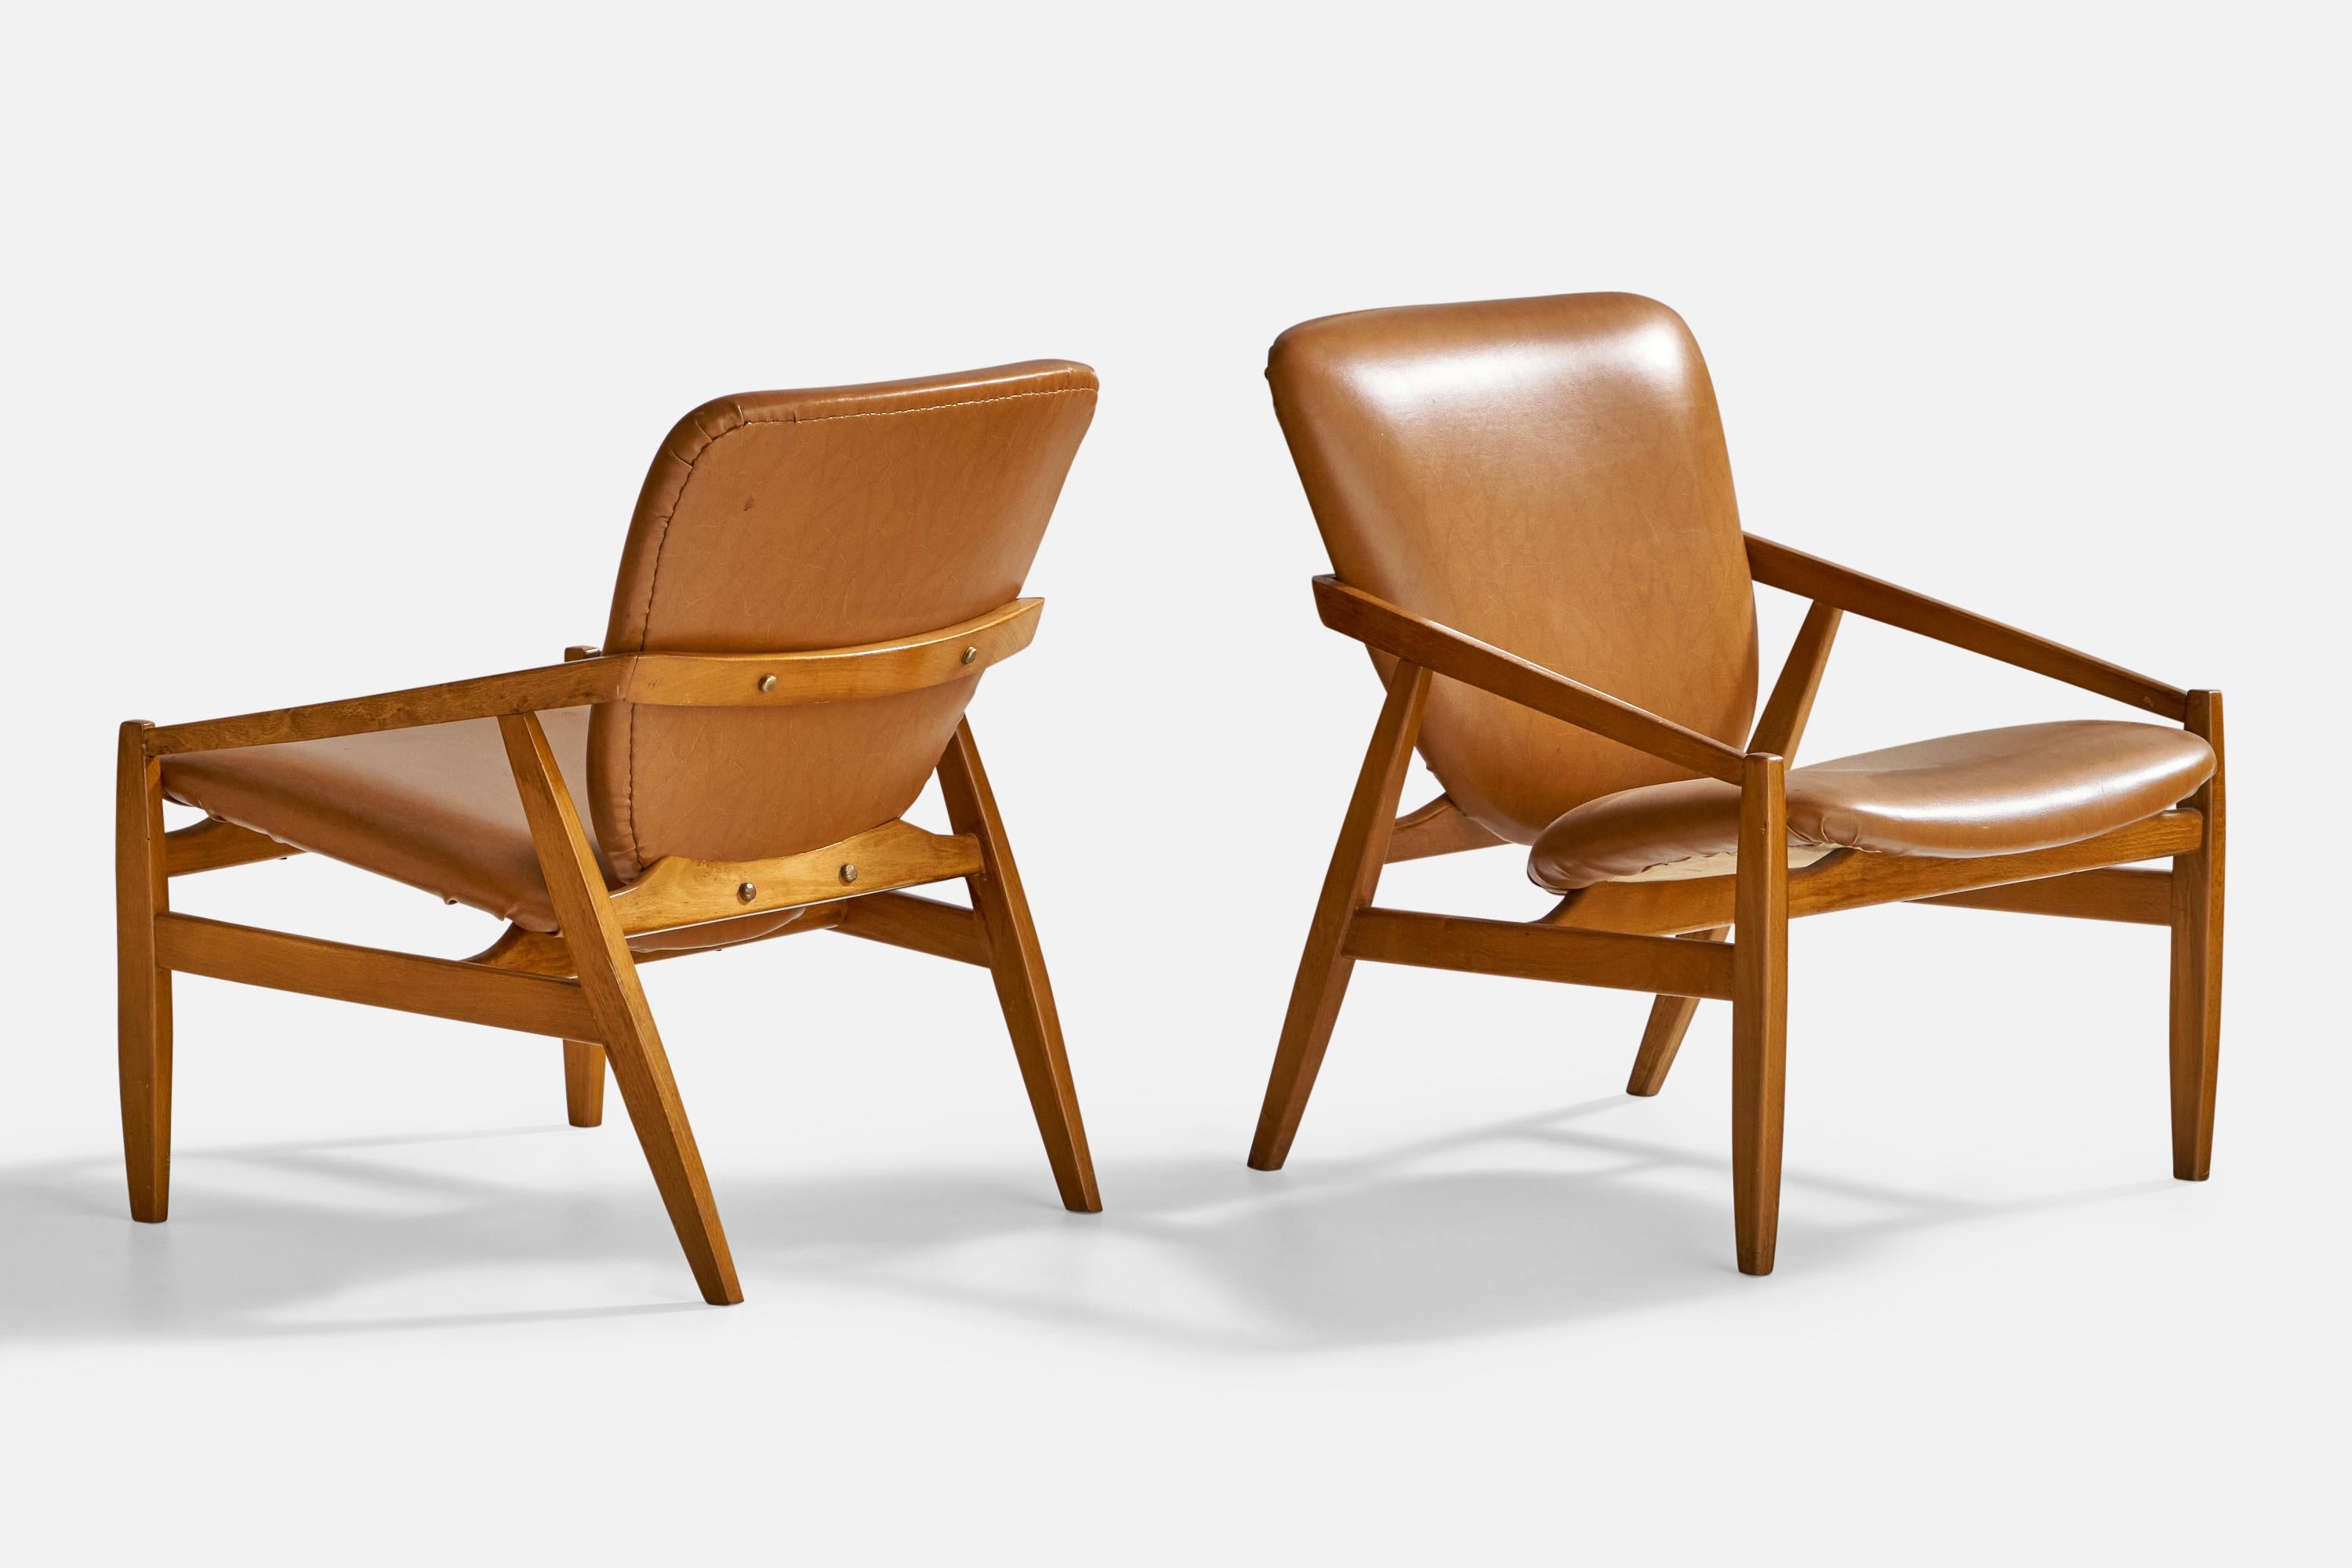 Faux Leather Italian Designer, Lounge Chairs, Walnut, Leatherette, Italy, 1950s For Sale